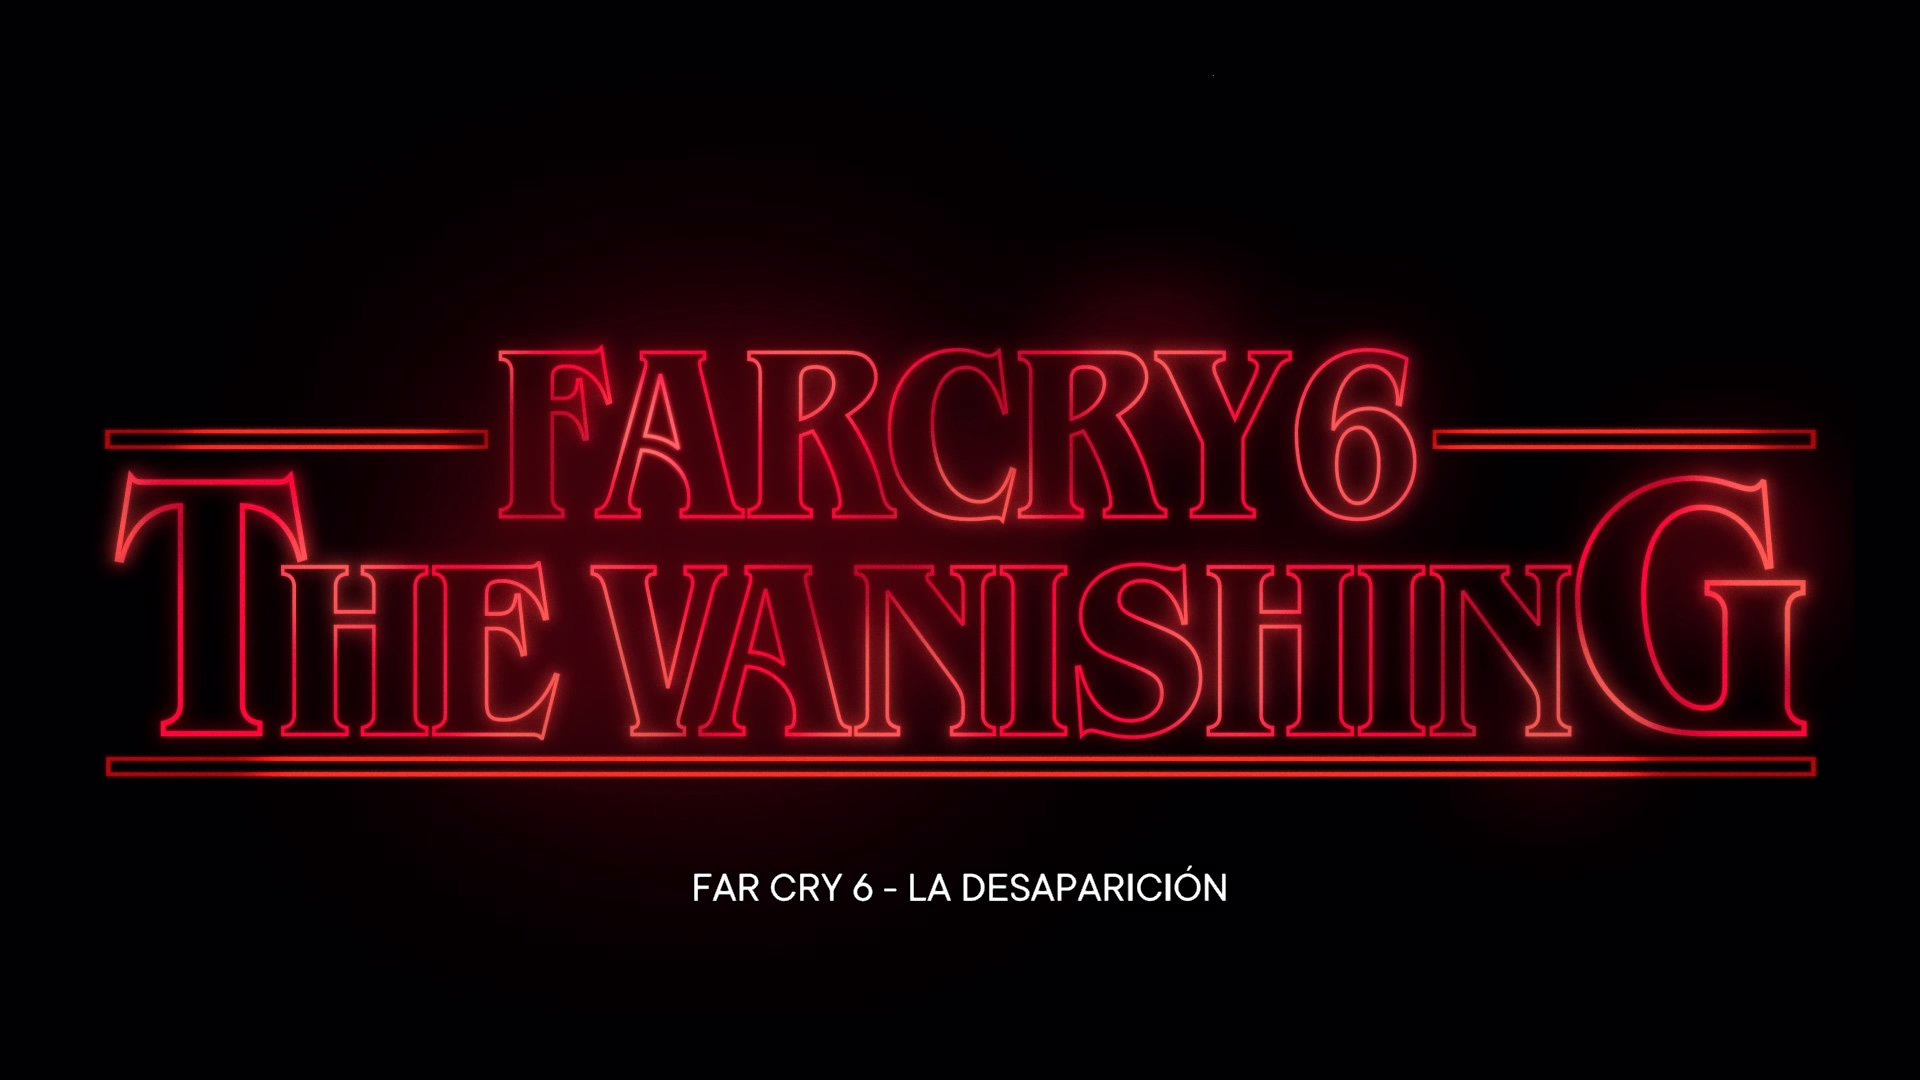 Far Cry 6 content, rewards and surprises of The Disappearance, the crossover with Stranger Things